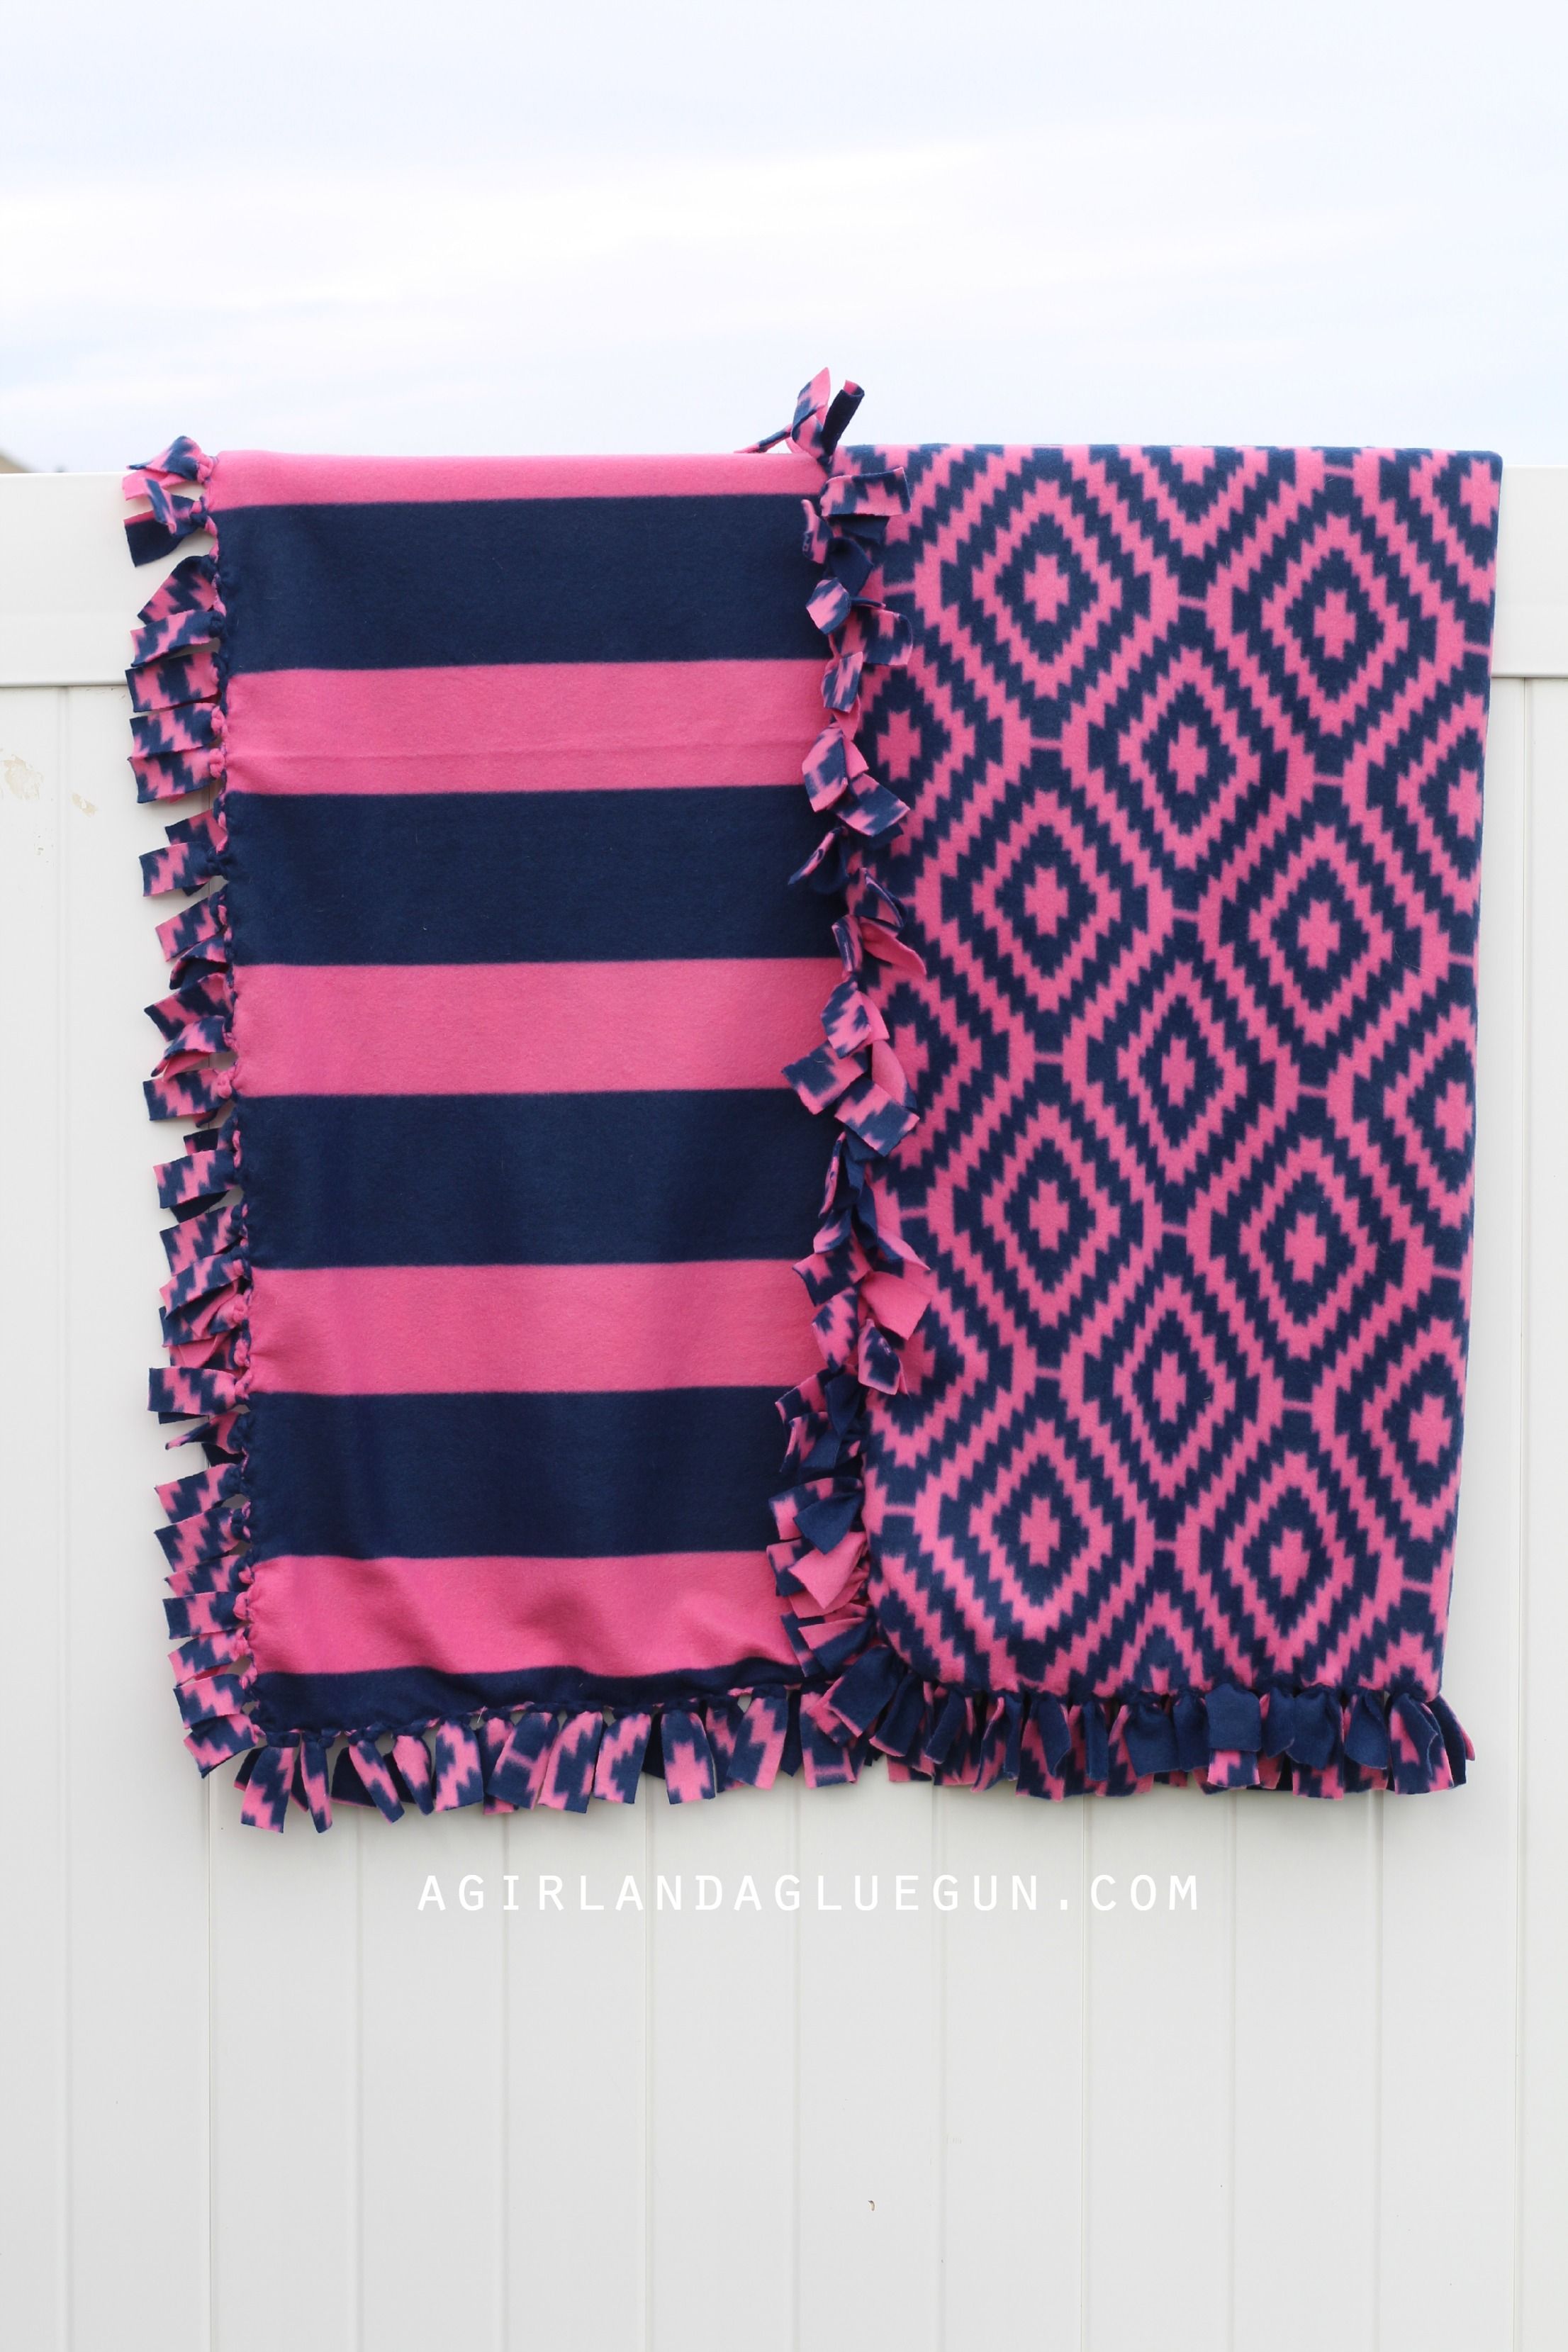 Everything you ever wanted to know about making fleece blankets ...